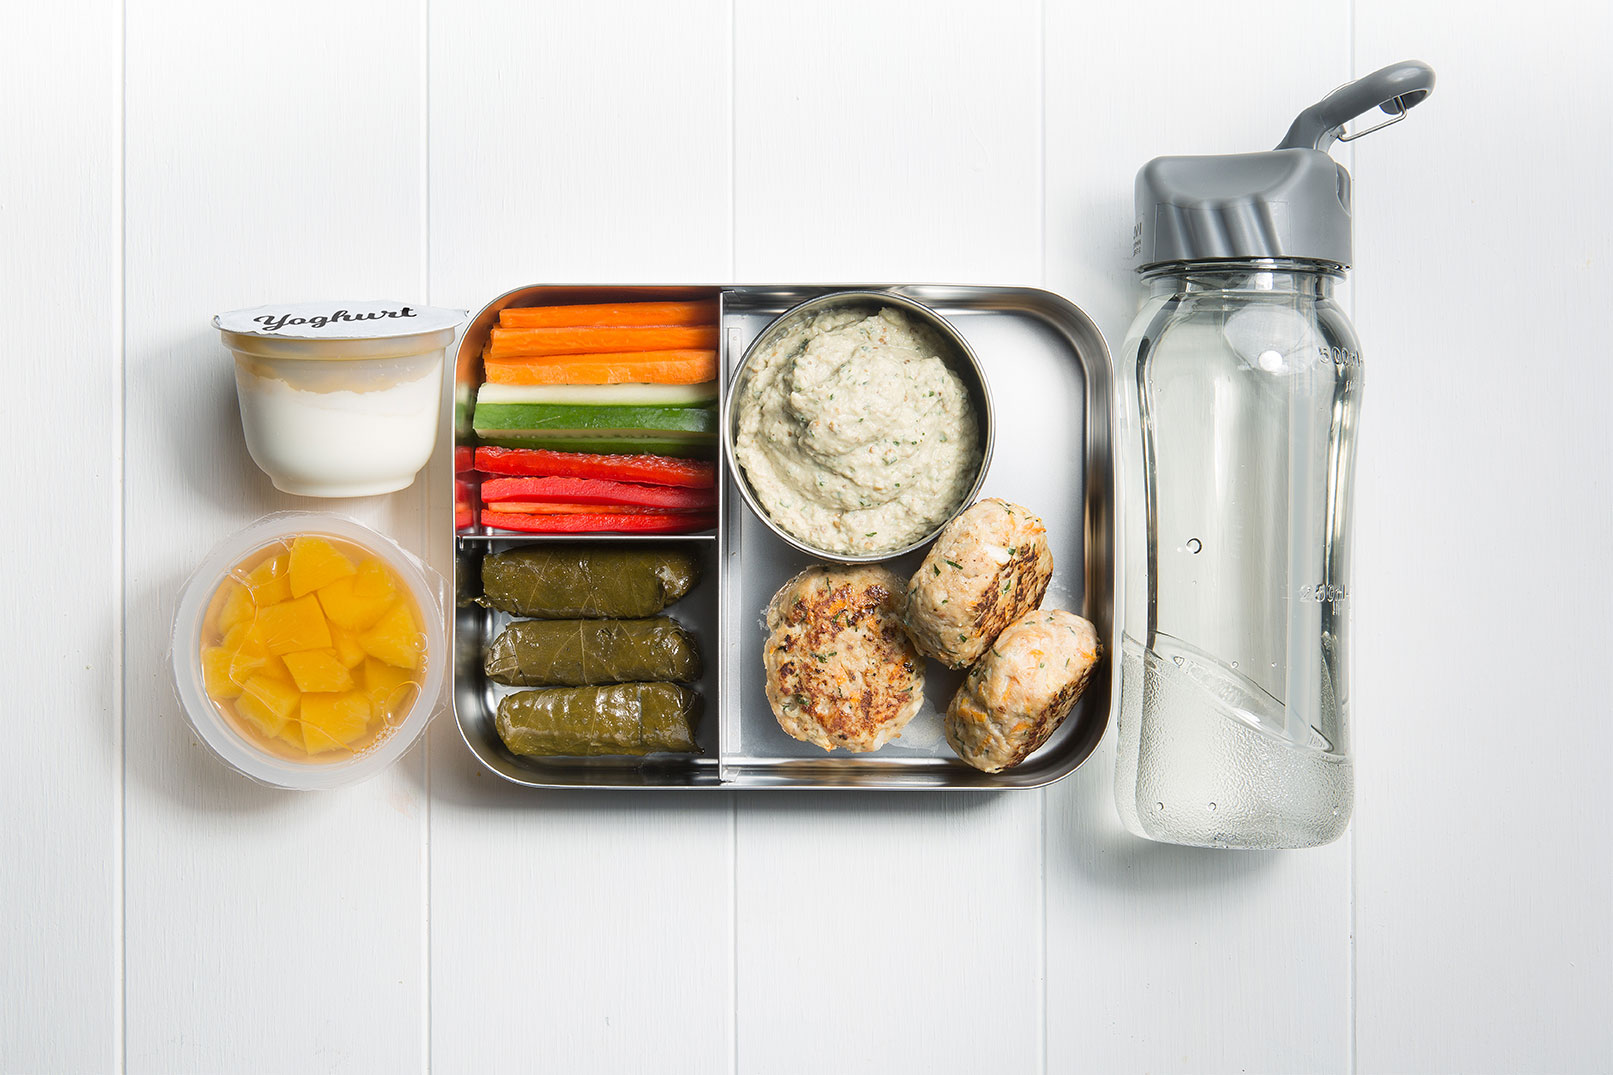 Image of a packed lunch box with dolmades, pork and apple rissoles, babaganoush with vegie sticks and canned fruit, yoghurt and a bottle of water on the side